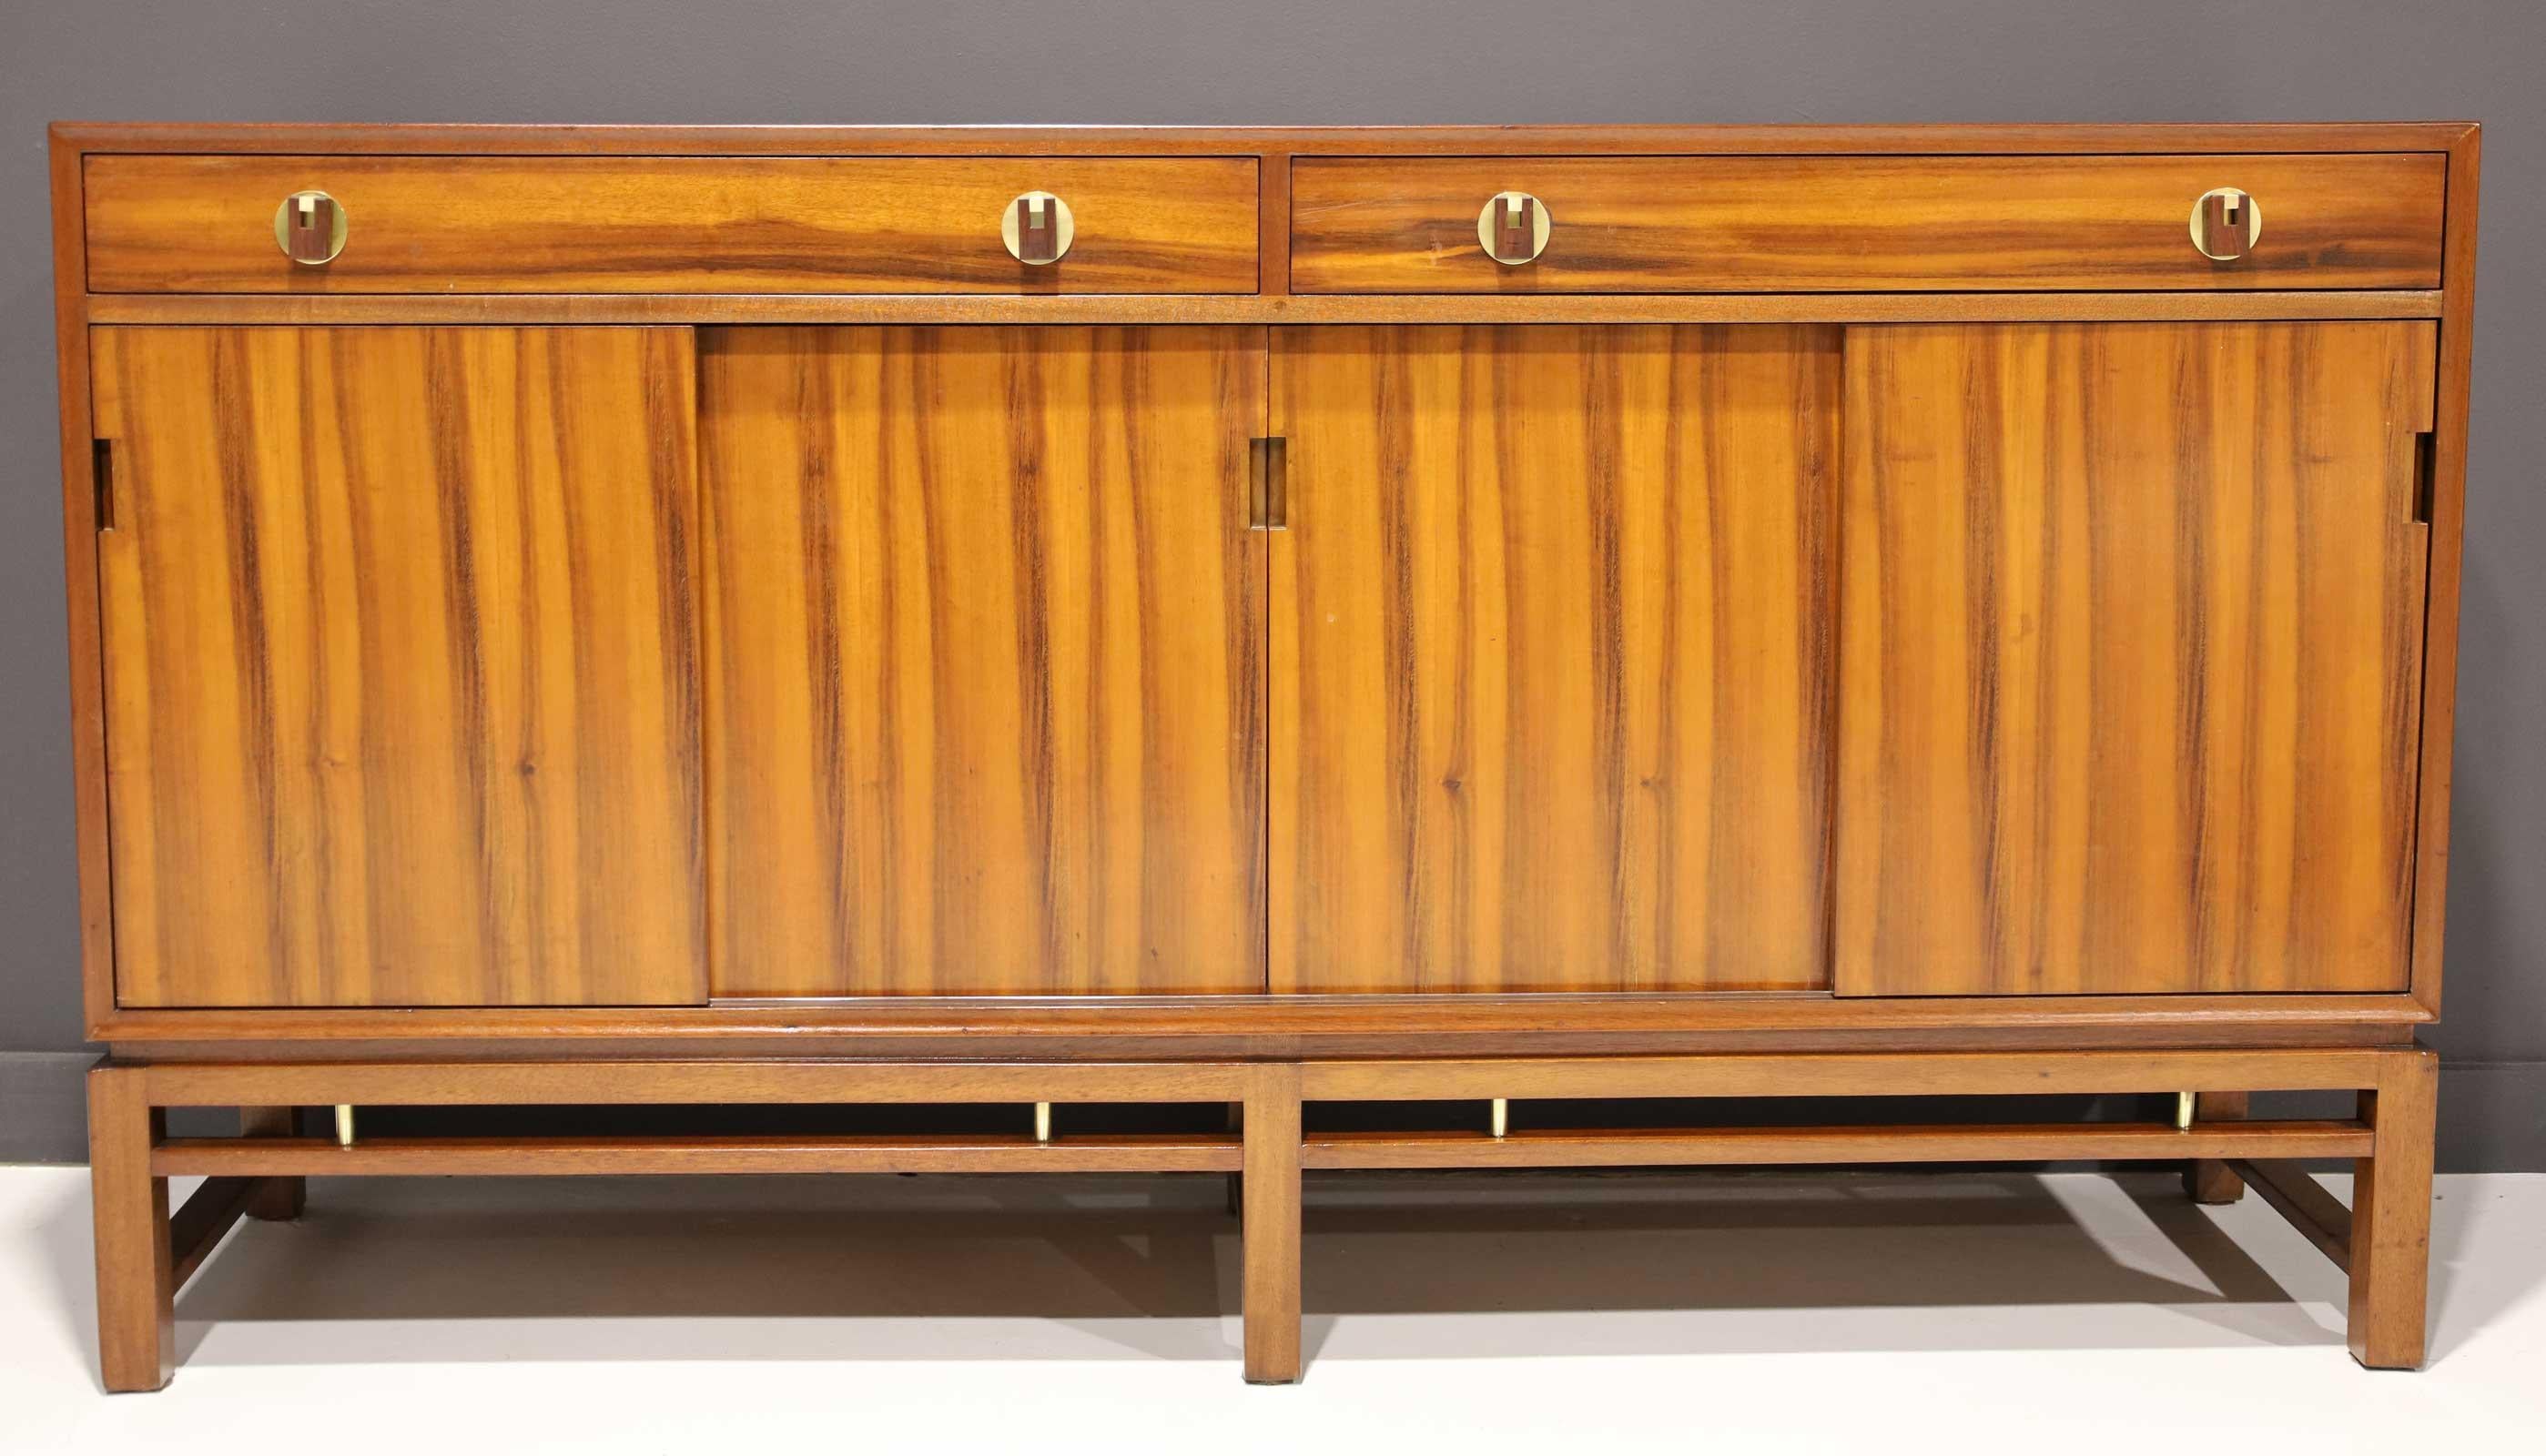 Not often seen, a fully restored sliding door sideboard by Edward Wormley for Dunbar. The cabinet features four sliding doors with loads of interior storage. The top section has two drawers each with two brass and wood decorative knobs. Brass trim